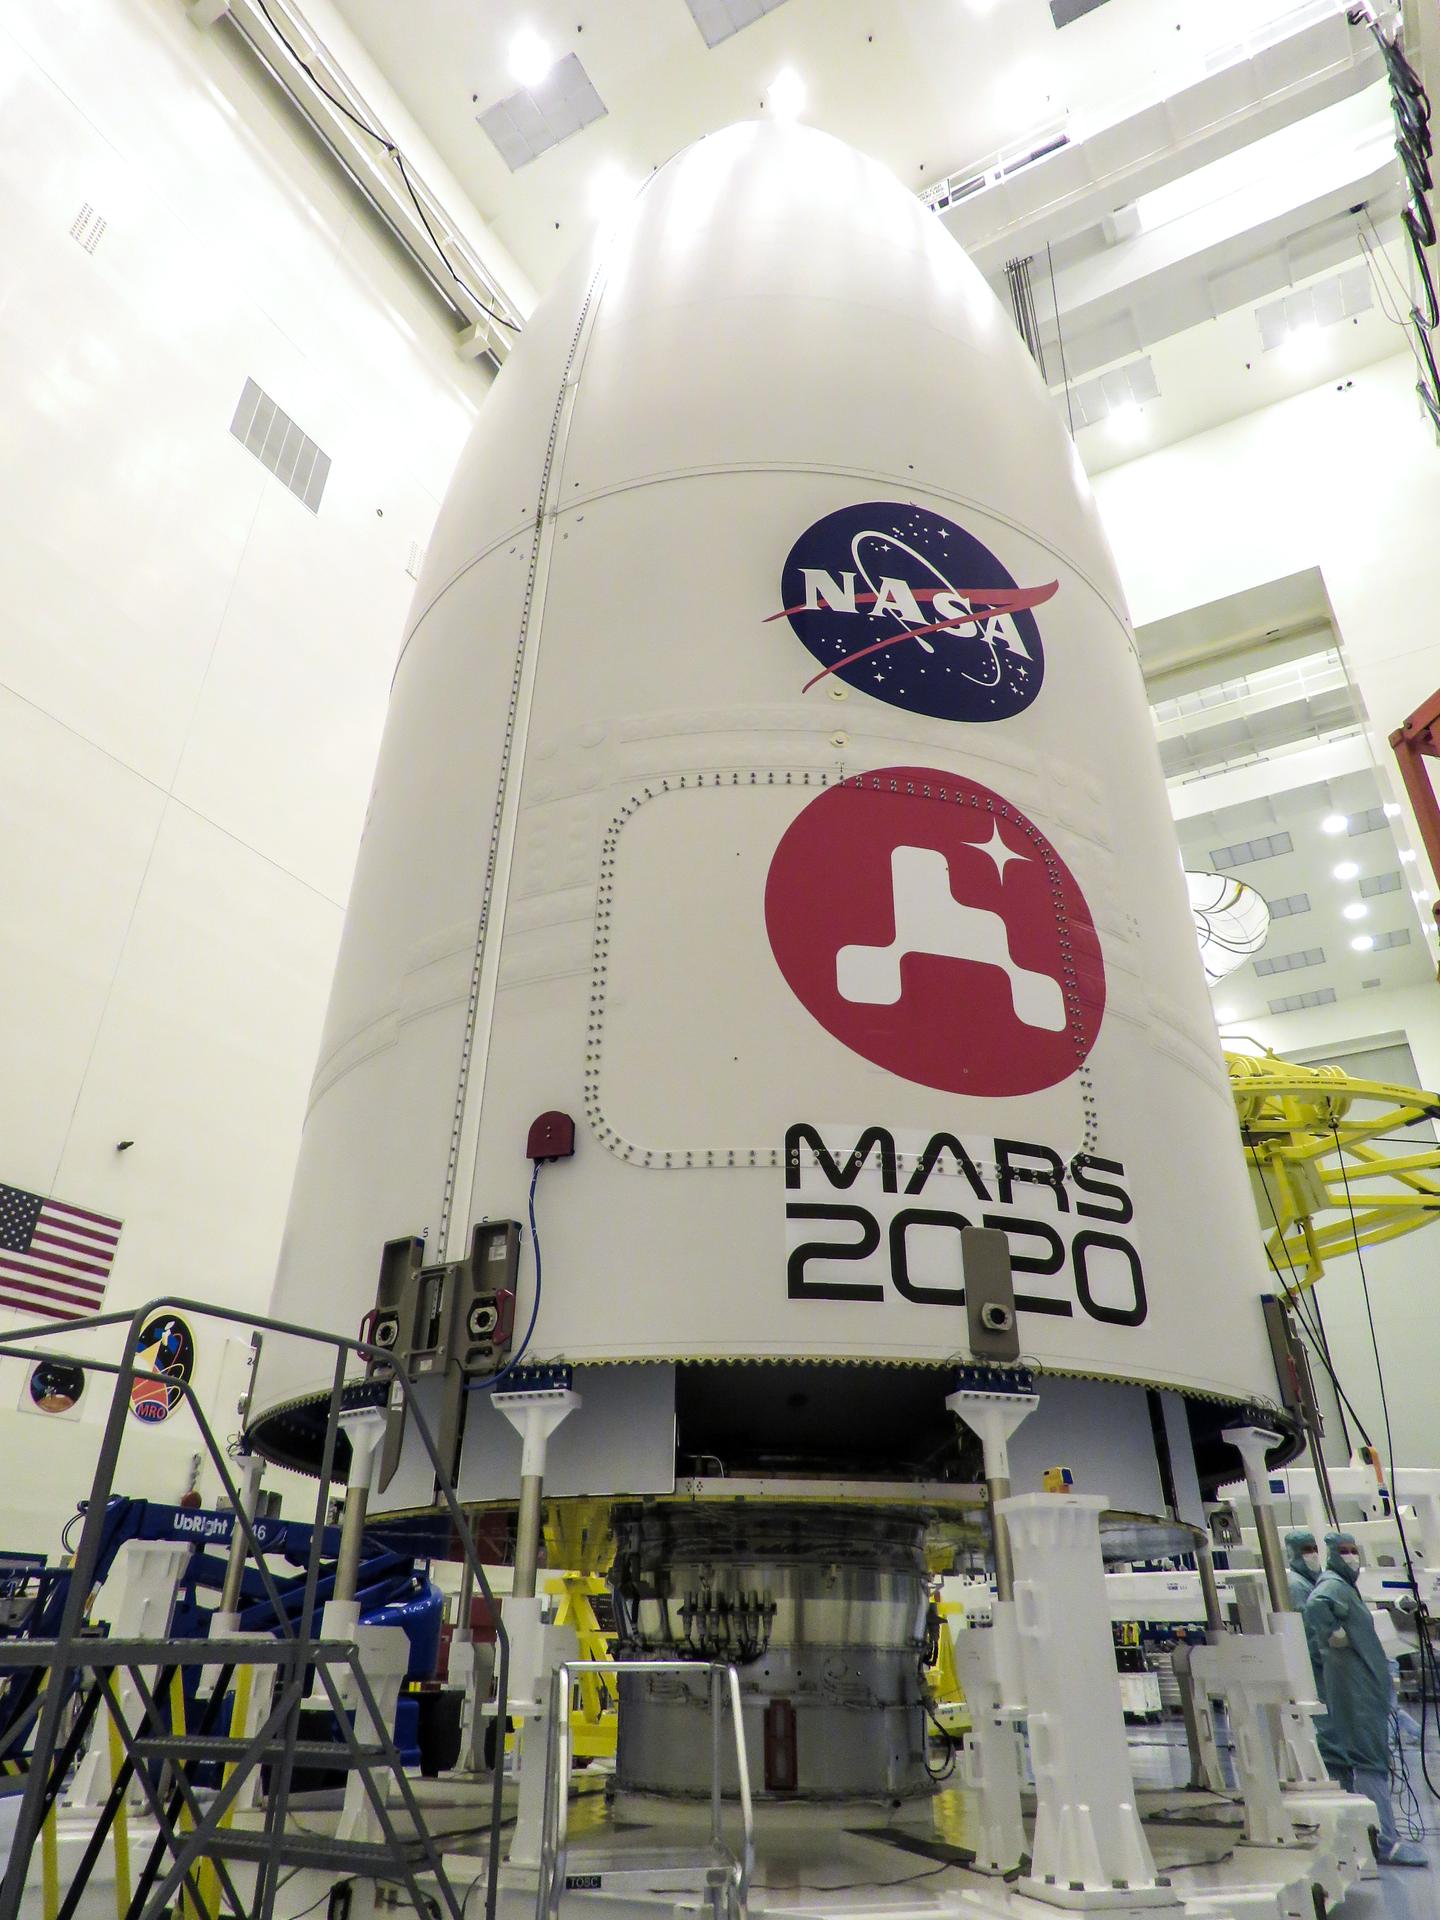 Image of the Mars 2020 logo being installed on the United Launch Alliance Atlas V payload fairing on June 18, 2020 inside the Payload Hazardous Servicing Facility at NASA's Kennedy Space Center. Logo is large red circle with white graphic image of the Perseverance rover and a small, four-pointed star in the upper right quadrant of the circle. Photo Credit: NASA/Christian Mangano